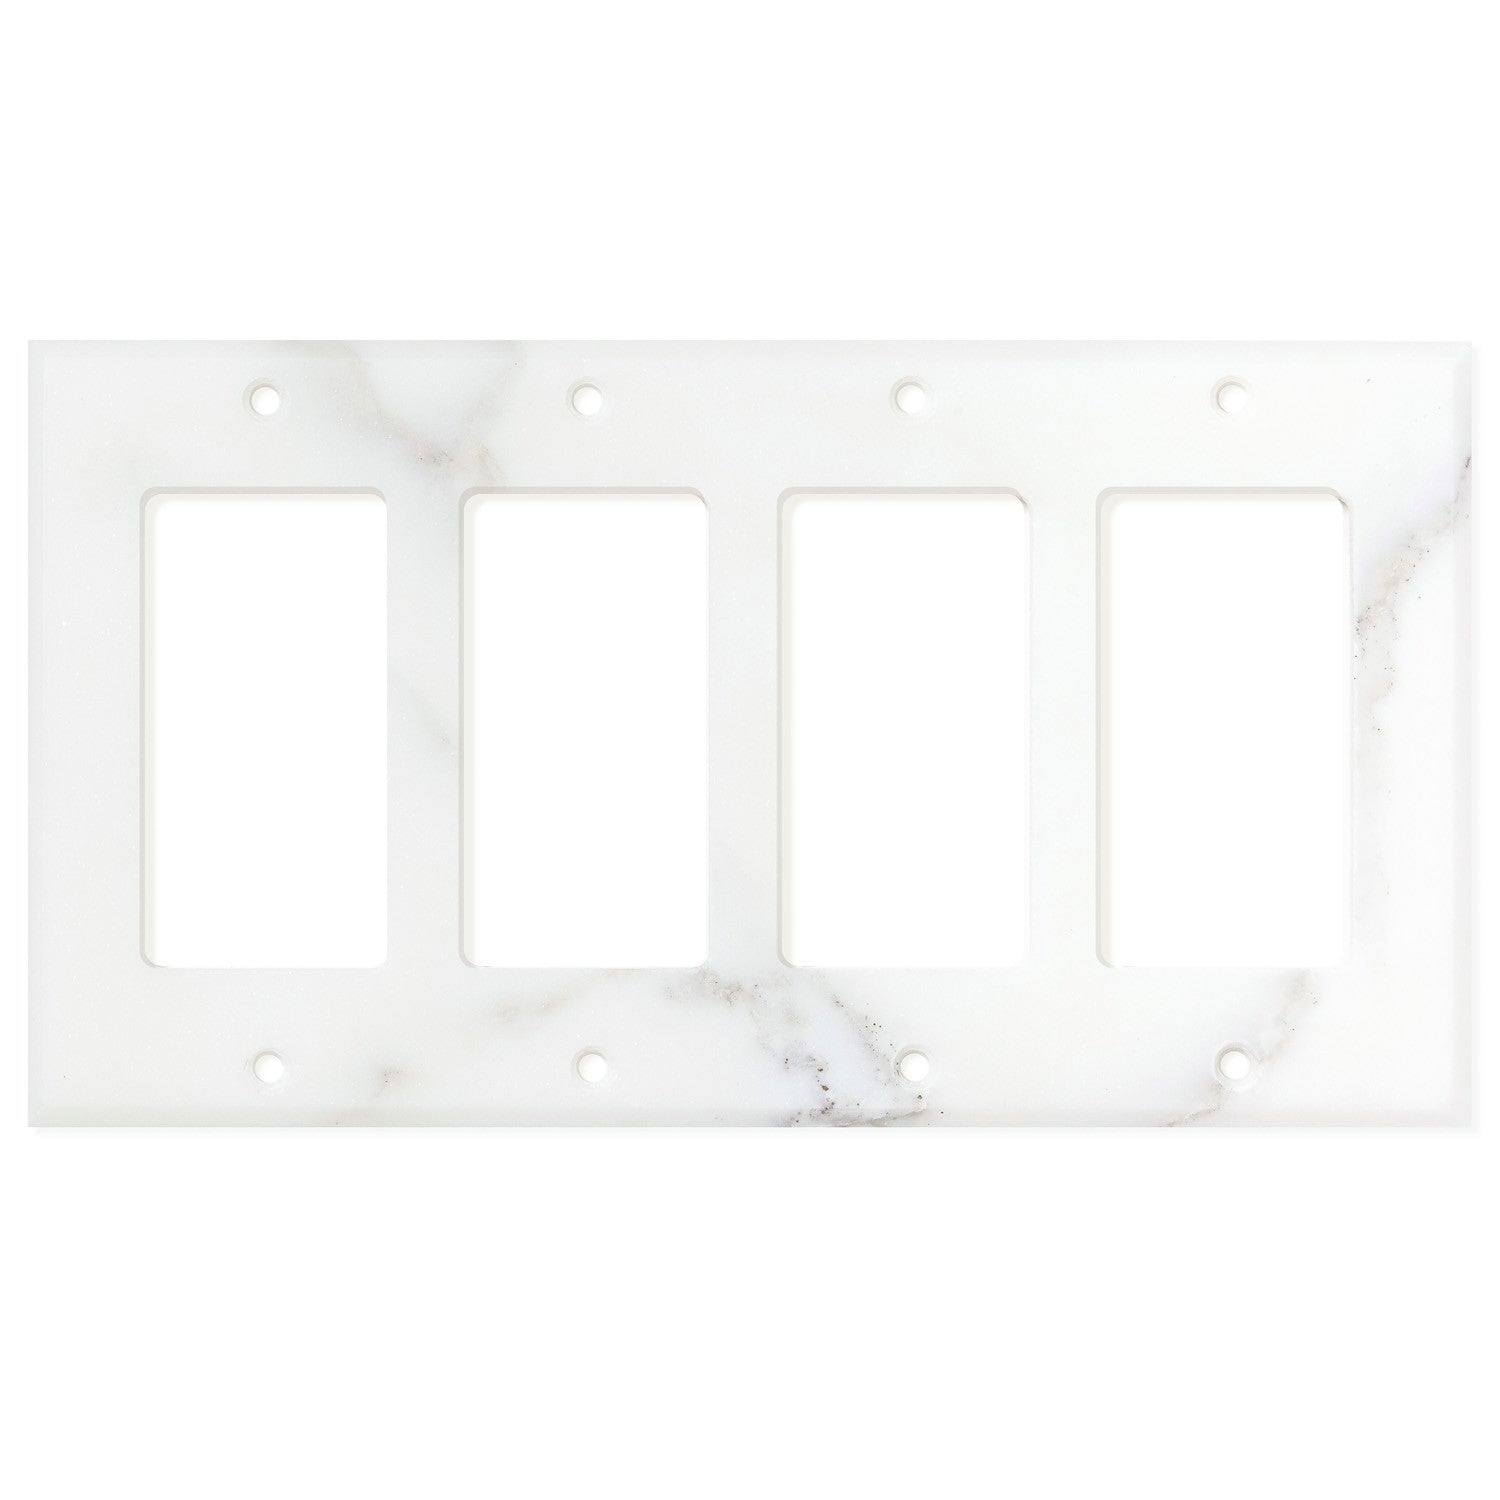 Calacatta Gold Marble Switch Plate Cover, Honed (4 ROCKER) - Tilephile